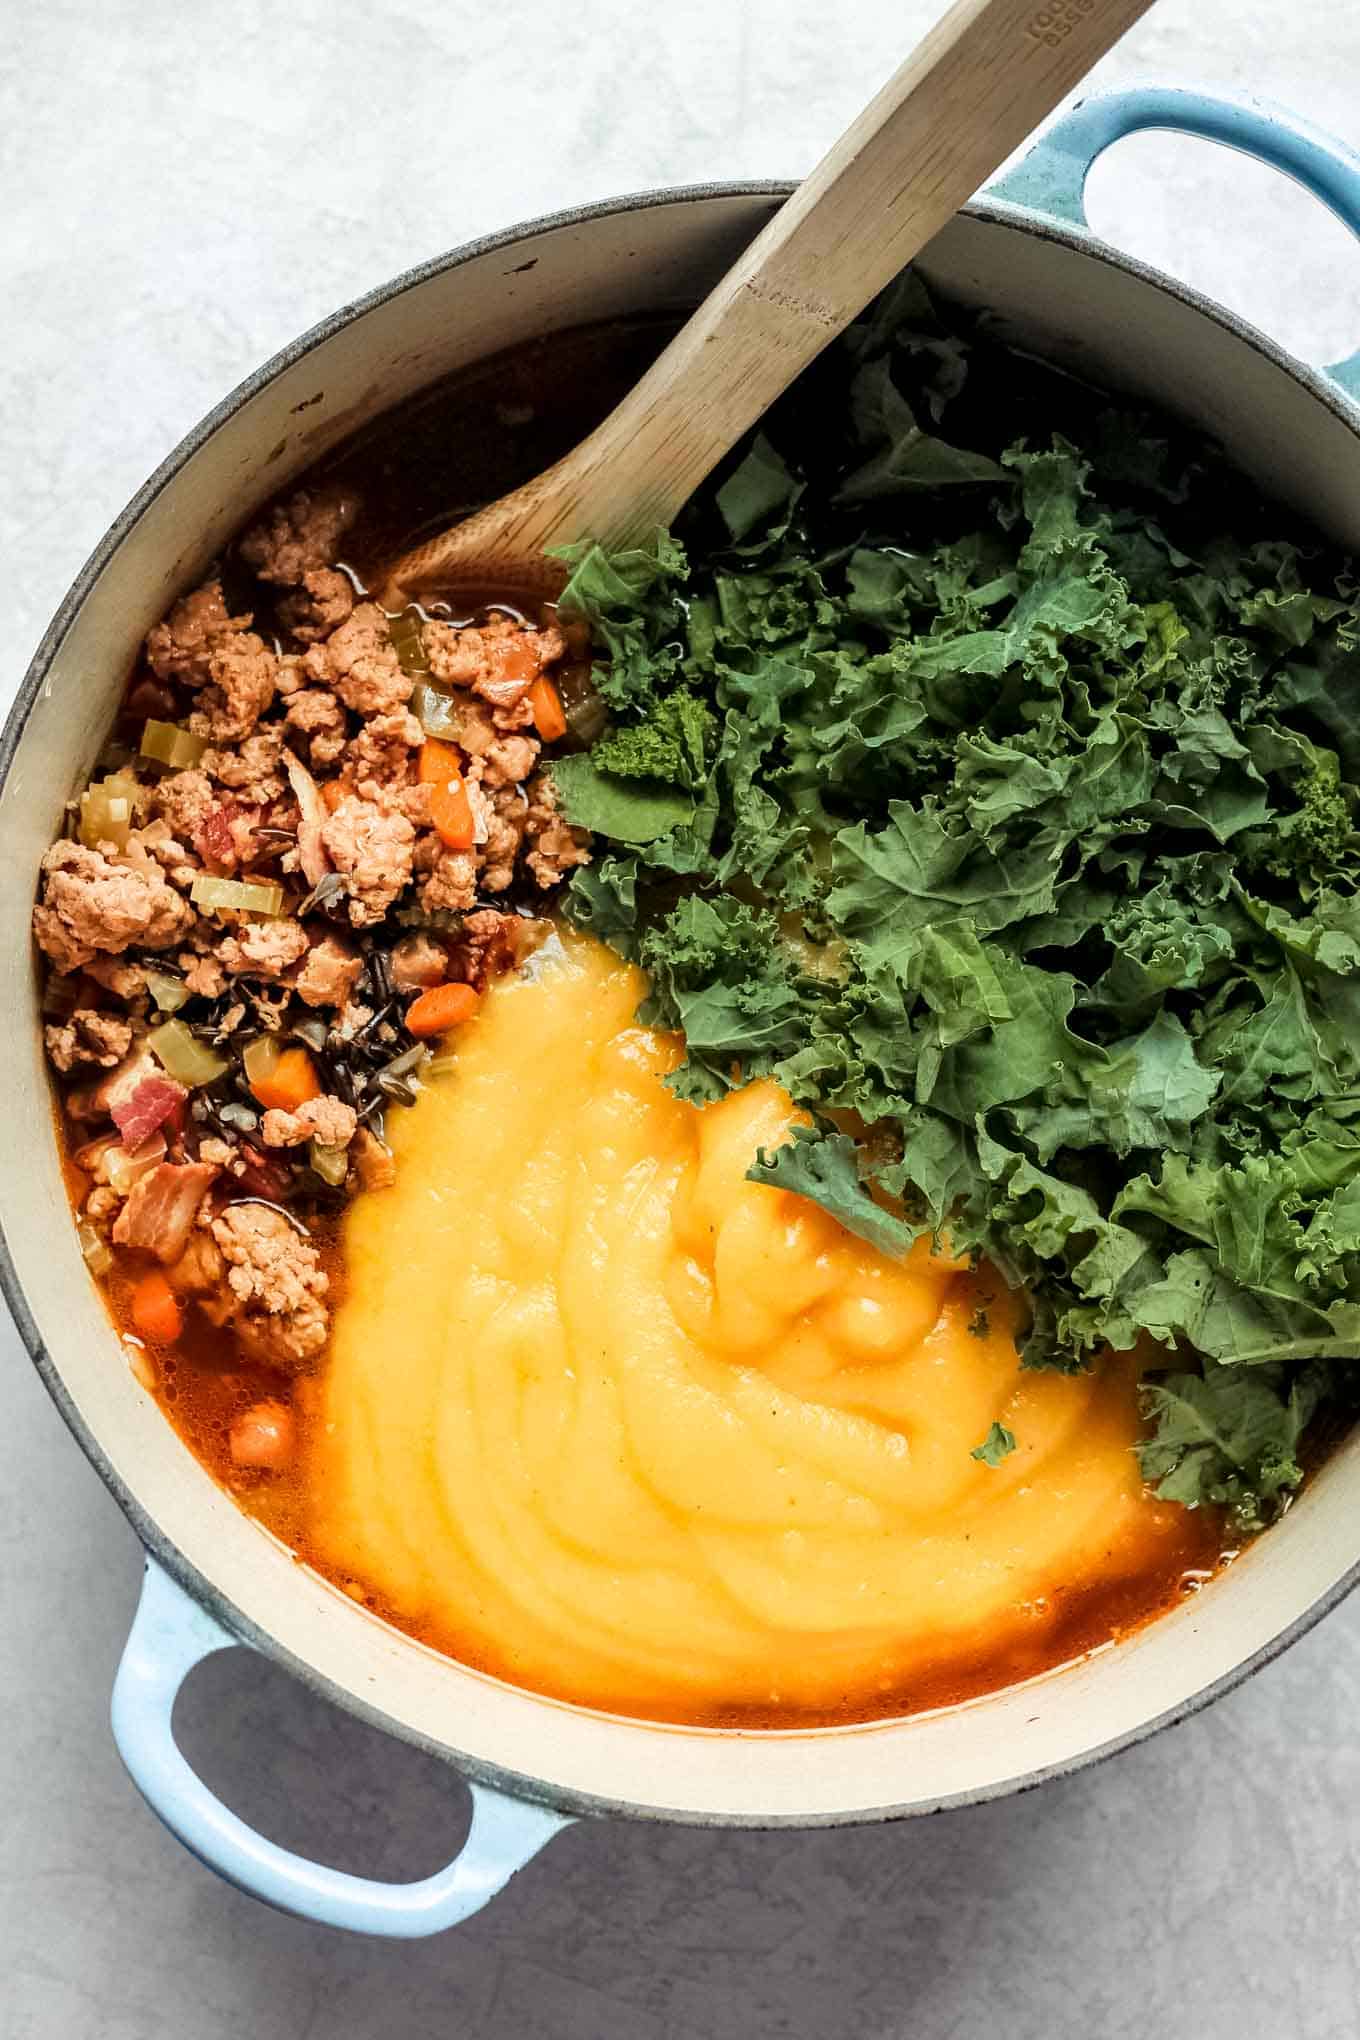 The wild rice and sausage mixture, kale, and pureed butternut squash in the pot prior to mixing together.